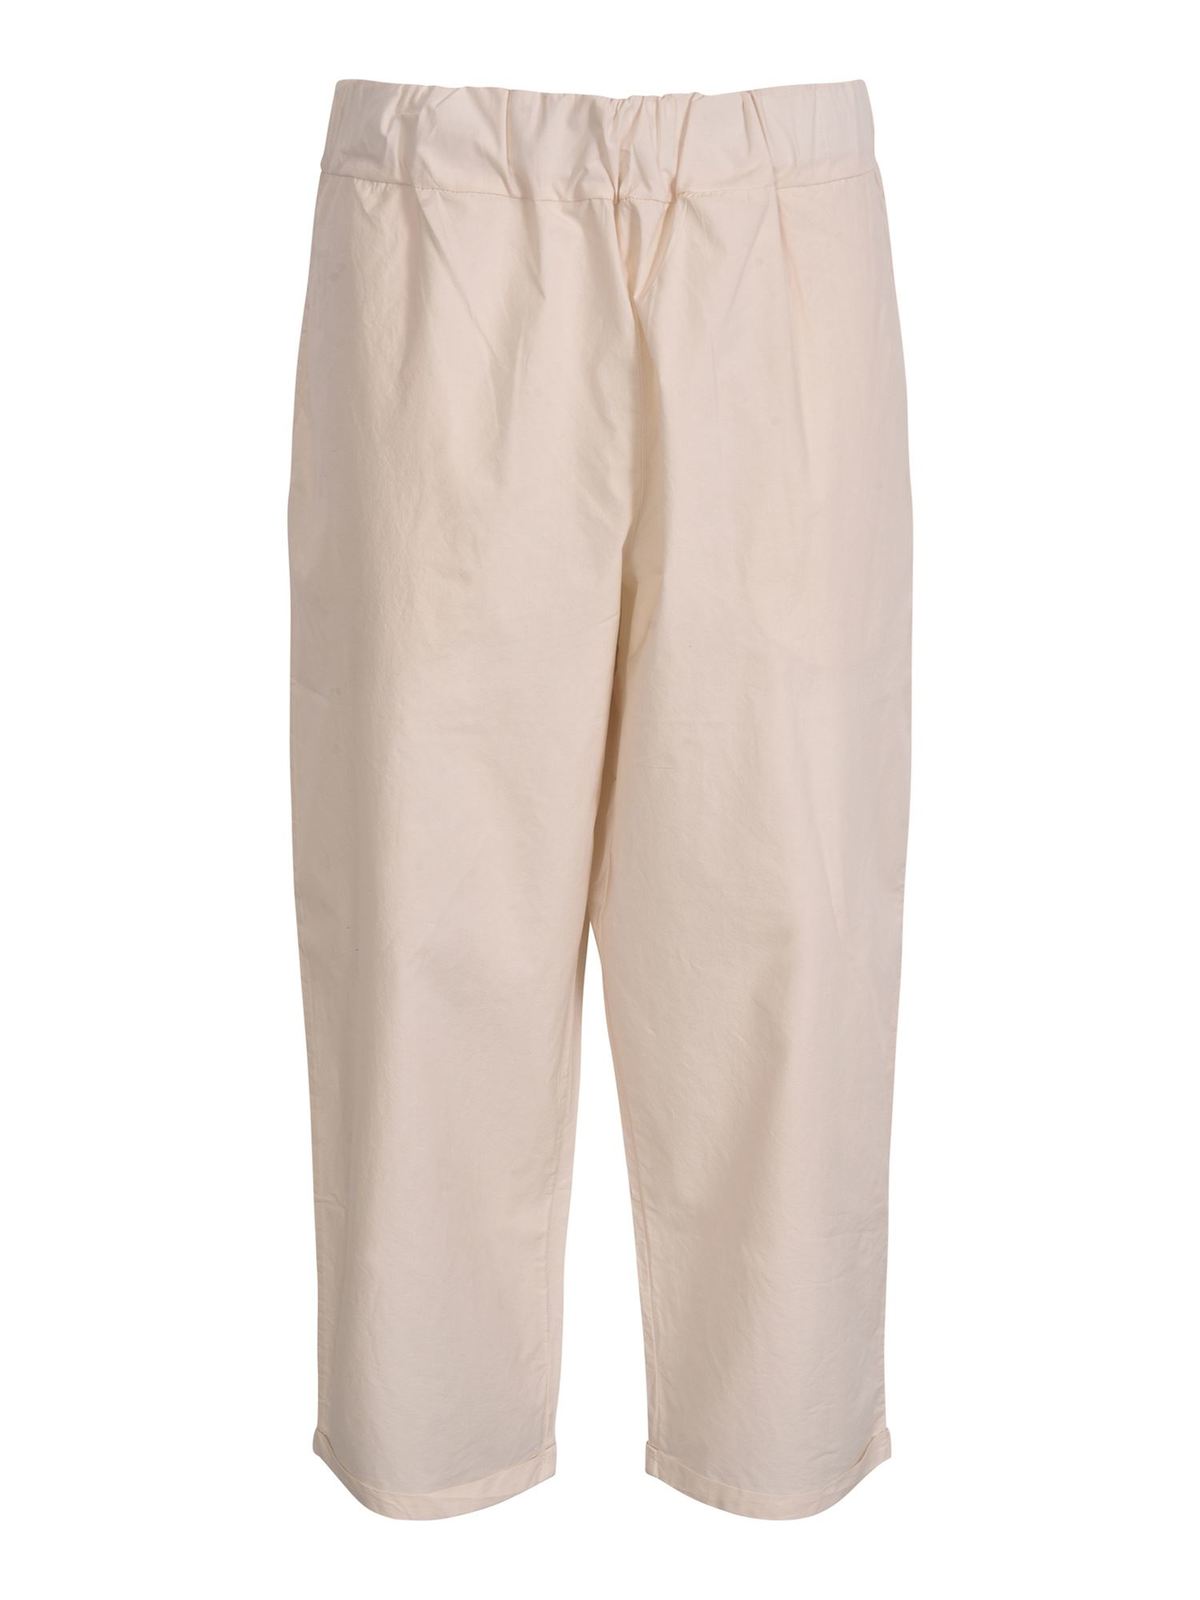 Labo.art VELA TROUSERS IN ROPE COLOR